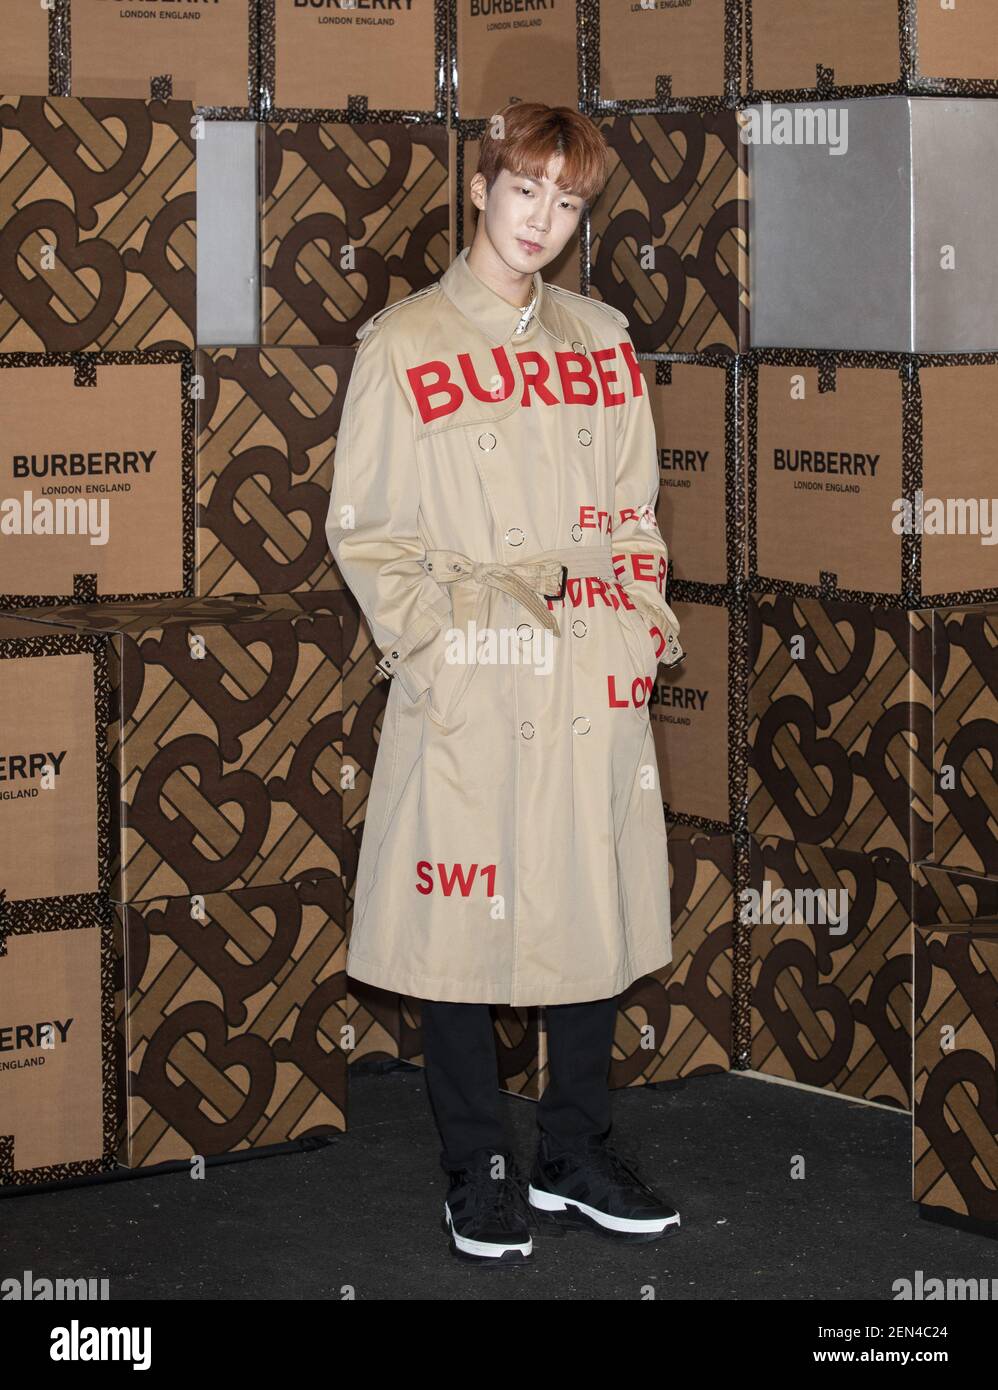 5 June 2019 - Seoul, South Korea : South Korean singer Lee Seung-hoon,  member of K-Pop boy band Winner, attends a photo call for the Burberry  Monogram Collection Launching in Seoul, South